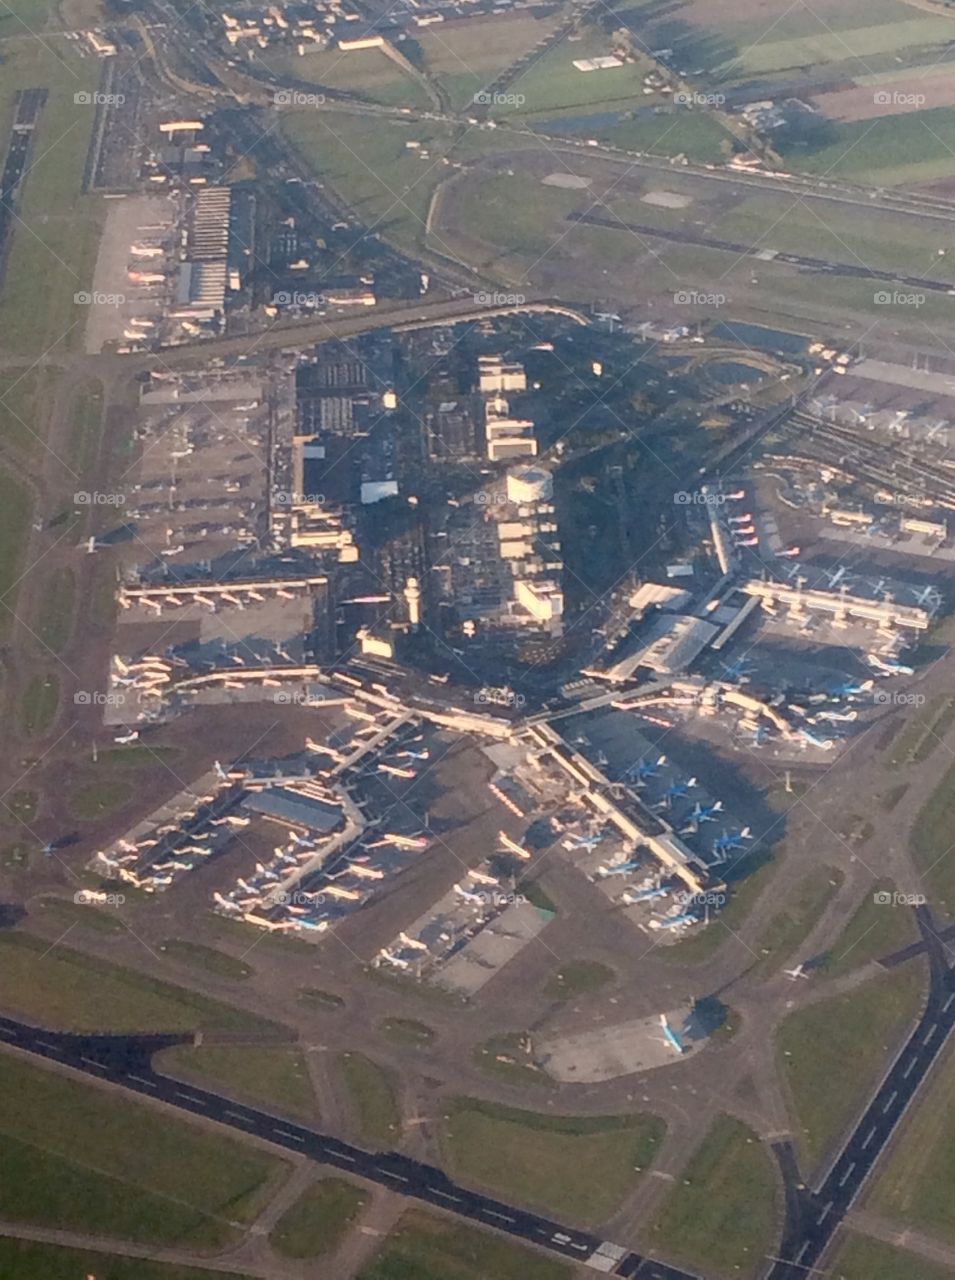 Schiphol airport from above 